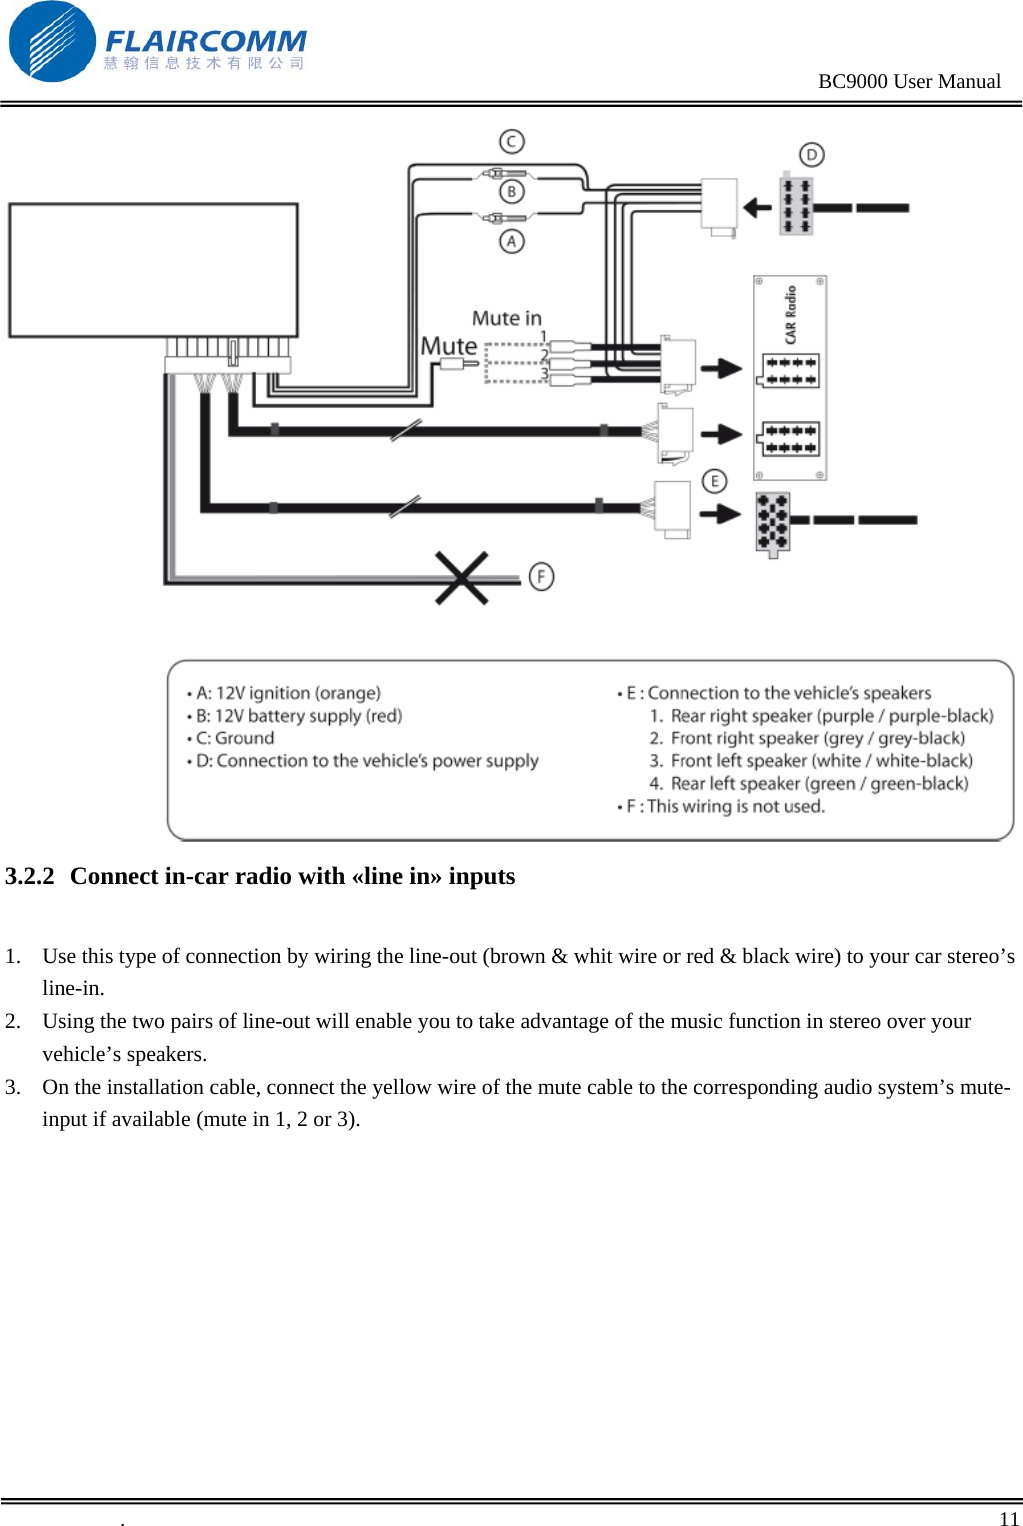                                                                                                BC9000 User Manual   3.2.2 Connect in-car radio with «line in» inputs  1. Use this type of connection by wiring the line-out (brown &amp; whit wire or red &amp; black wire) to your car stereo’s line-in.  2. Using the two pairs of line-out will enable you to take advantage of the music function in stereo over your vehicle’s speakers. 3. On the installation cable, connect the yellow wire of the mute cable to the corresponding audio system’s mute-input if available (mute in 1, 2 or 3).  .       11    